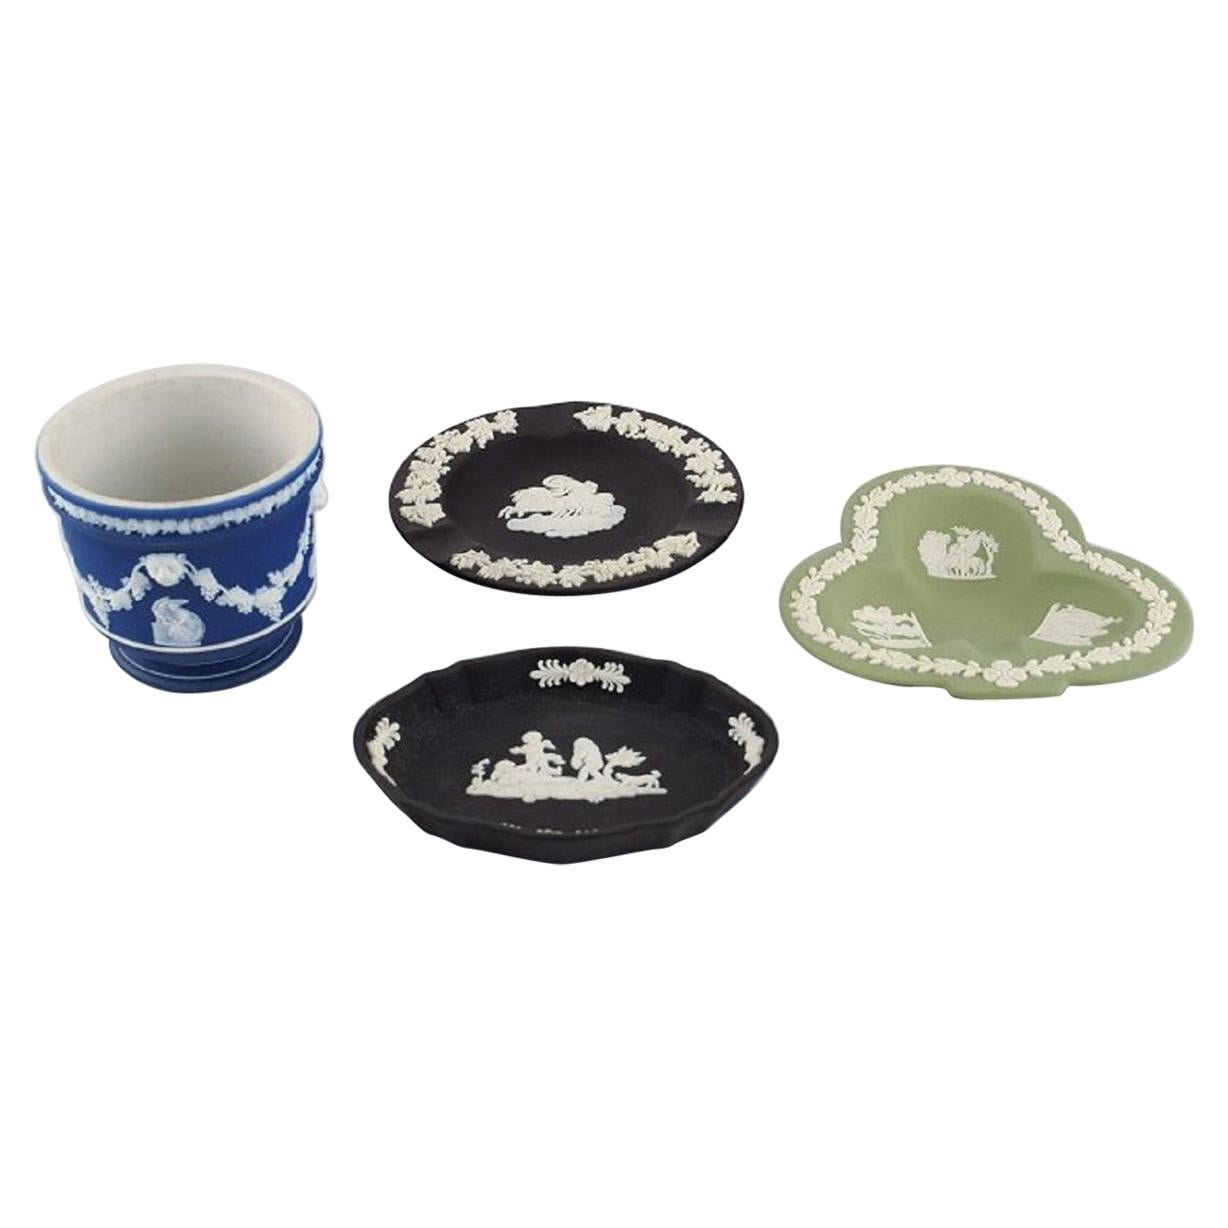 Wedgwood, England, Three Bowls/Dishes and a Flowerpot, Early 20th C